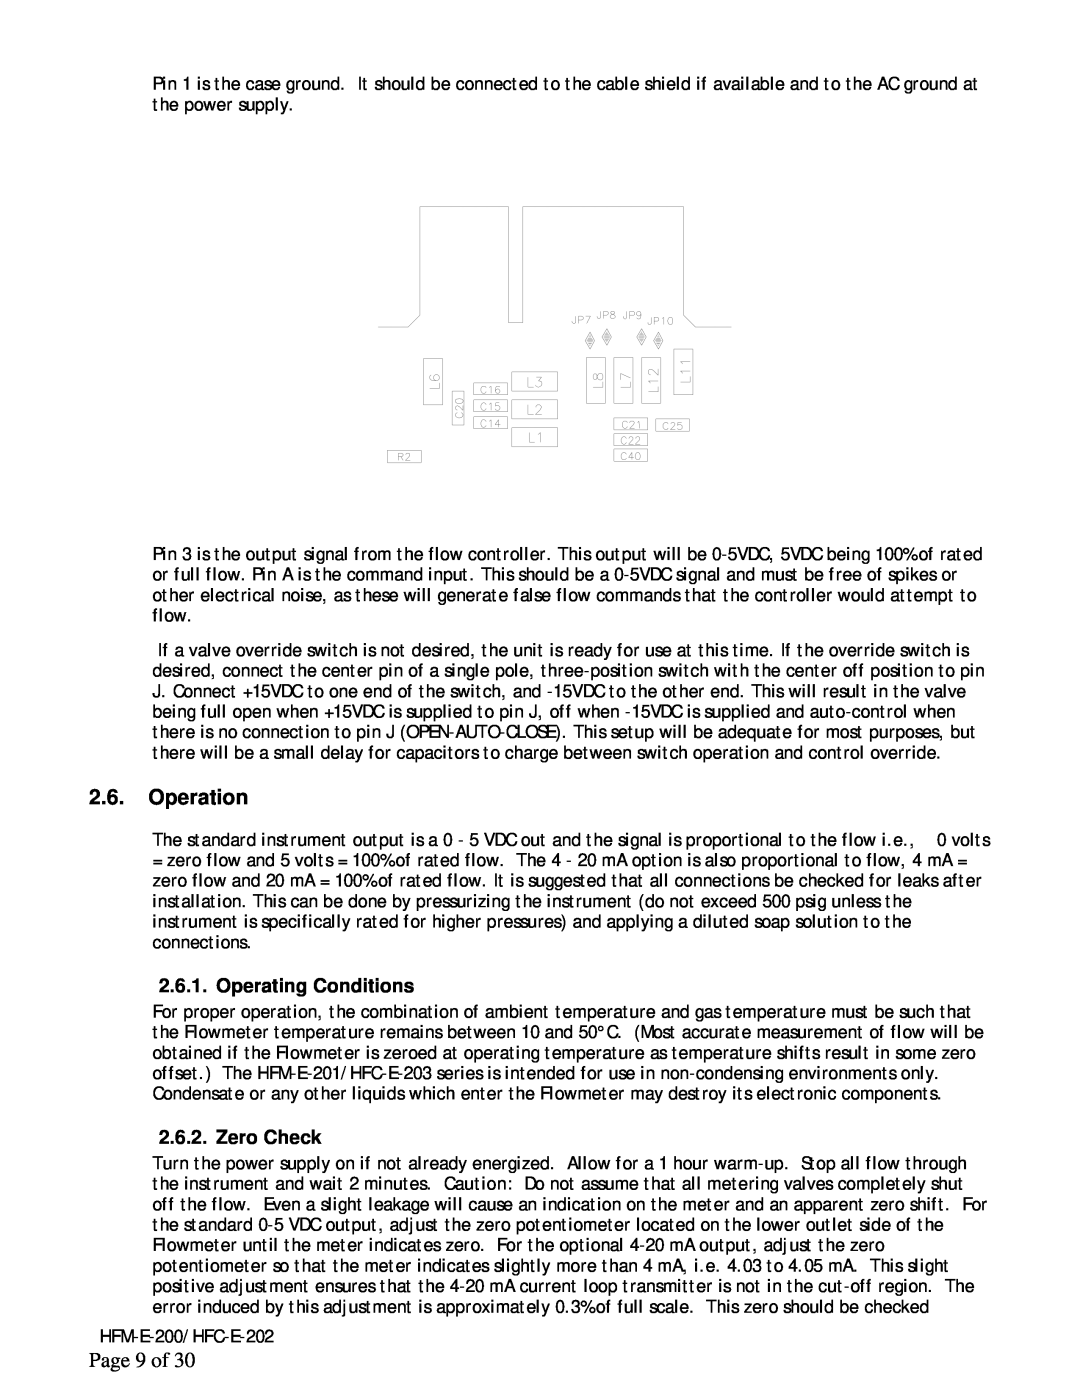 Teledyne HFM-E-200, HFC-E-202 instruction manual Operation, Page 9 of, Operating Conditions, Zero Check 